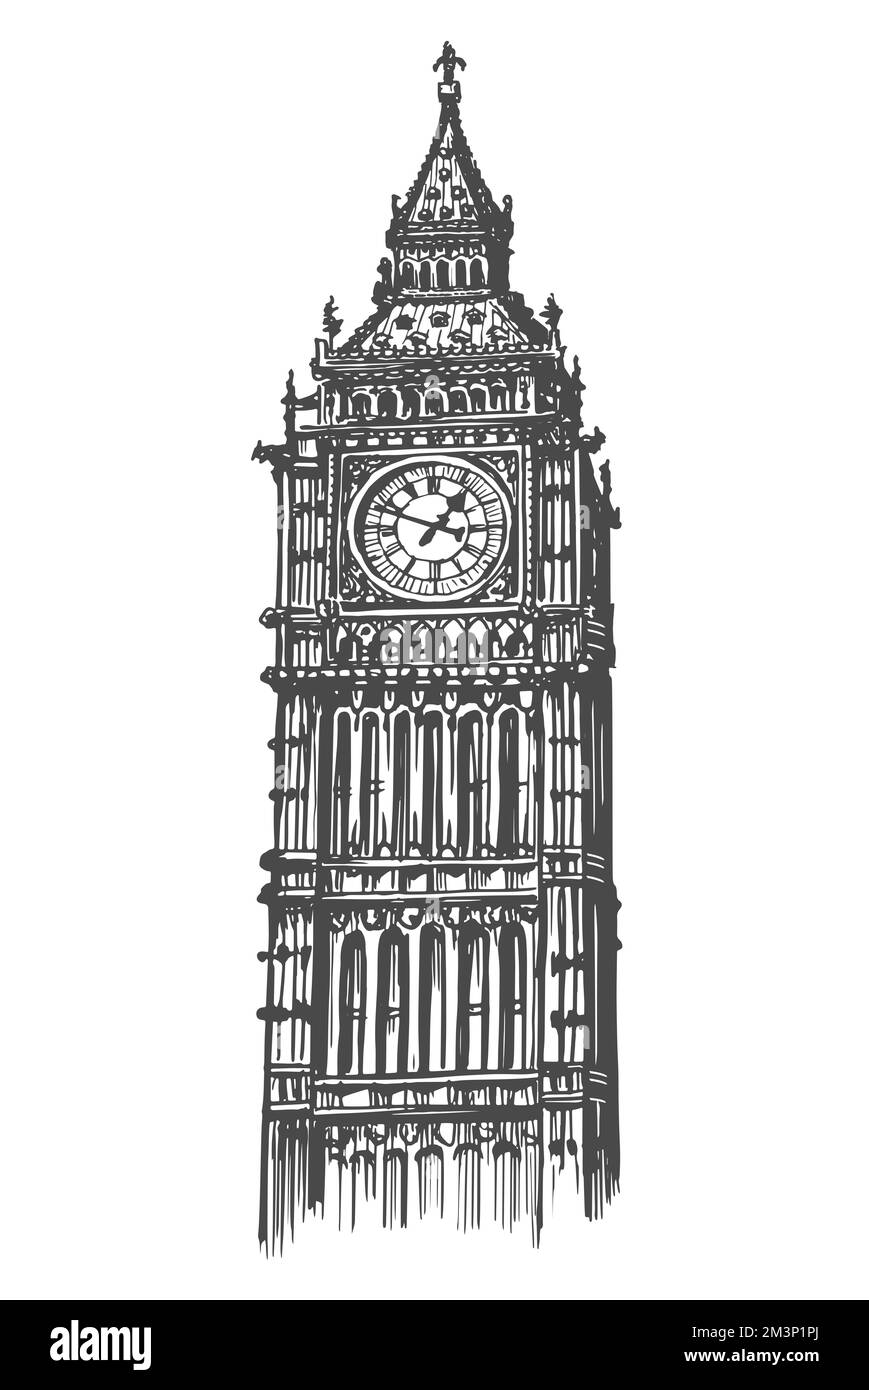 Big Ben tower symbol of London, England and Great Britain in vintage engraving style. Sketch illustration Stock Photo